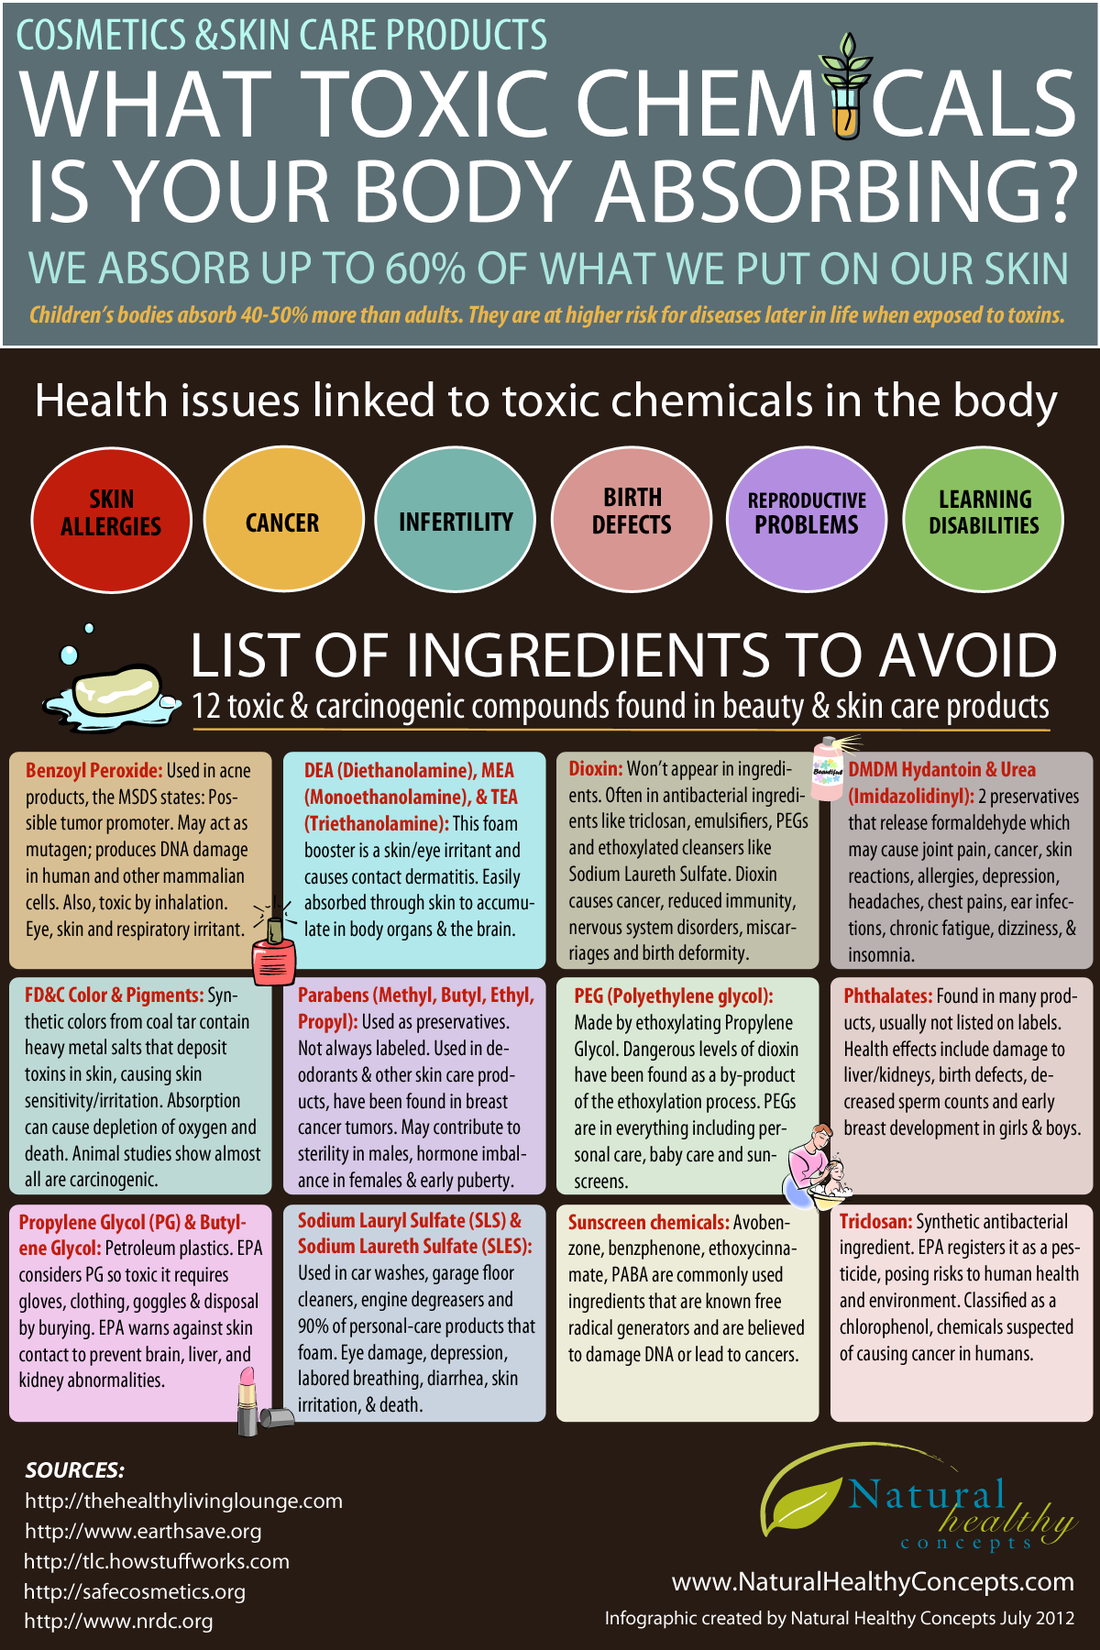 12 Toxic Ingredients to AVOID in Cosmetics & Skin Care Products